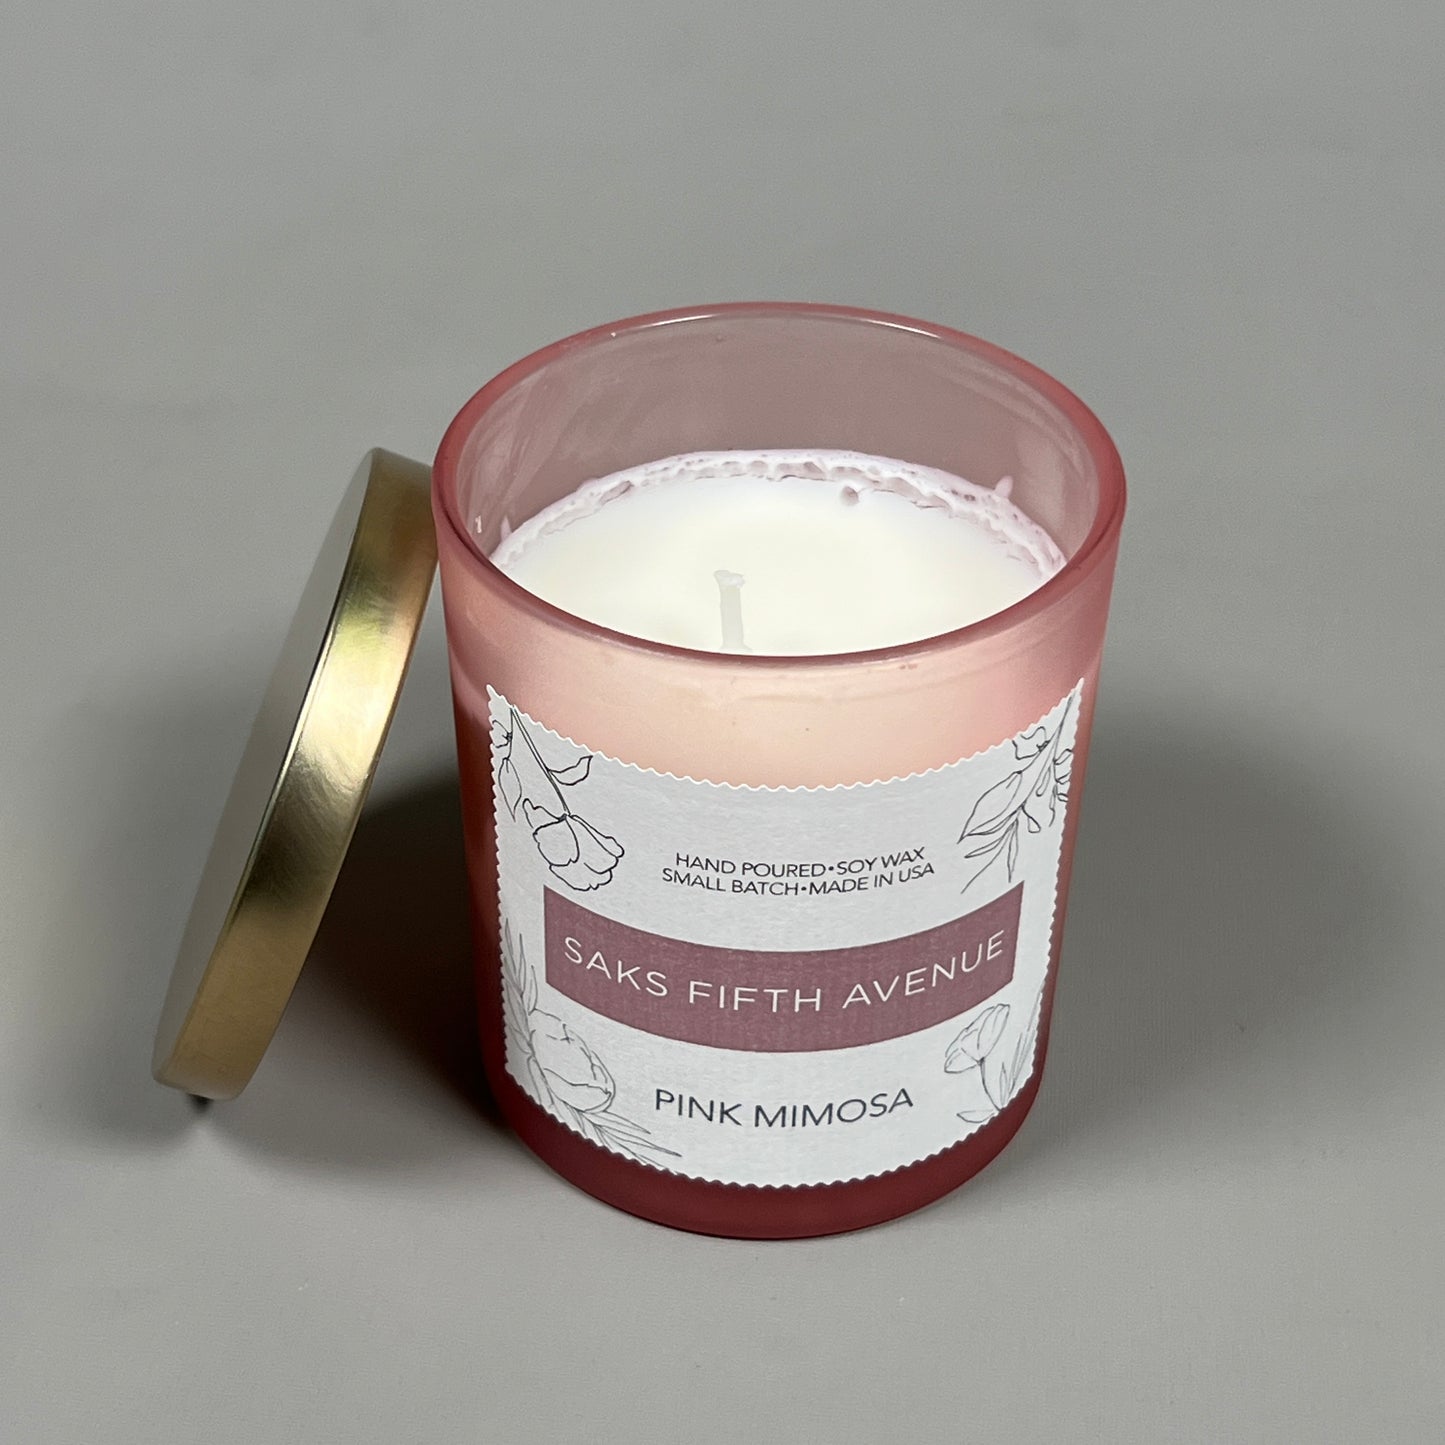 SAKS FIFTH AVENUE Pink Mimosa Hand Poured Soy Wax Candle 8 fl oz (New)